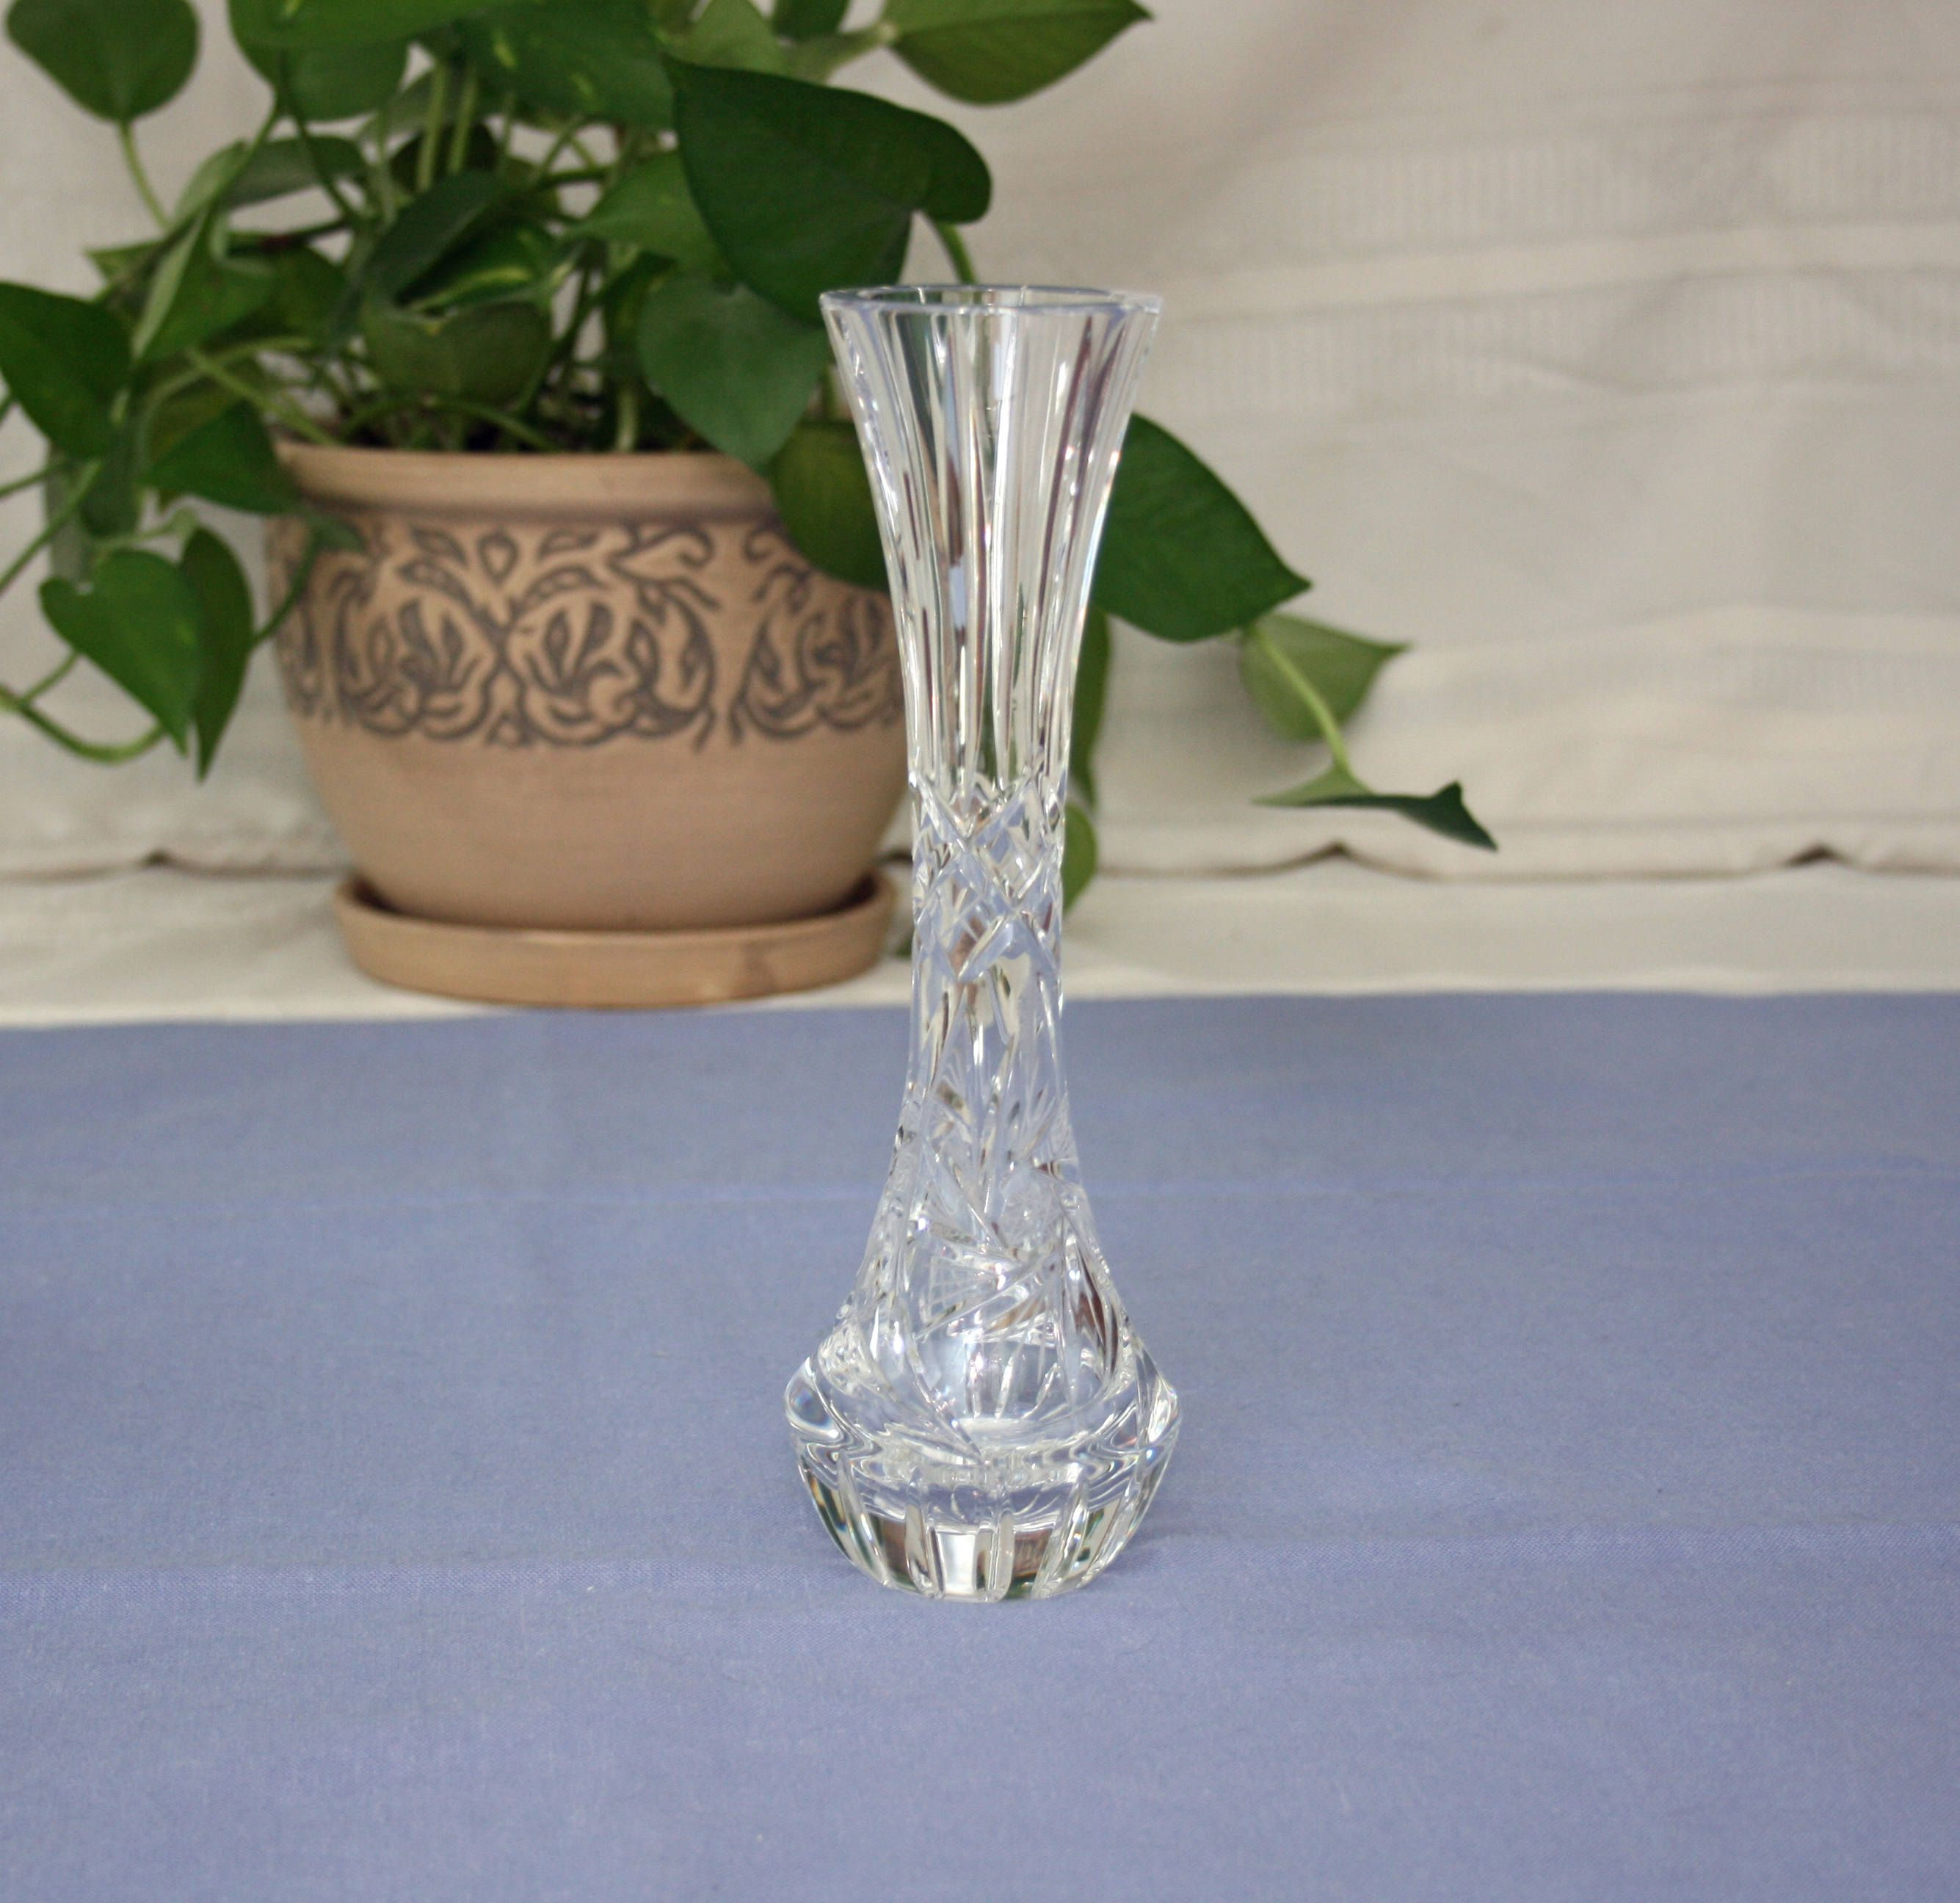 19 Recommended Lenox Bud Vase Gold Trim 2024 free download lenox bud vase gold trim of vintage pair 6 inch pressed glass candlesticks with hand c with regard to vintage lead crystal fluted bud vase hand cut swirled star pinwheel flower glass vase ho